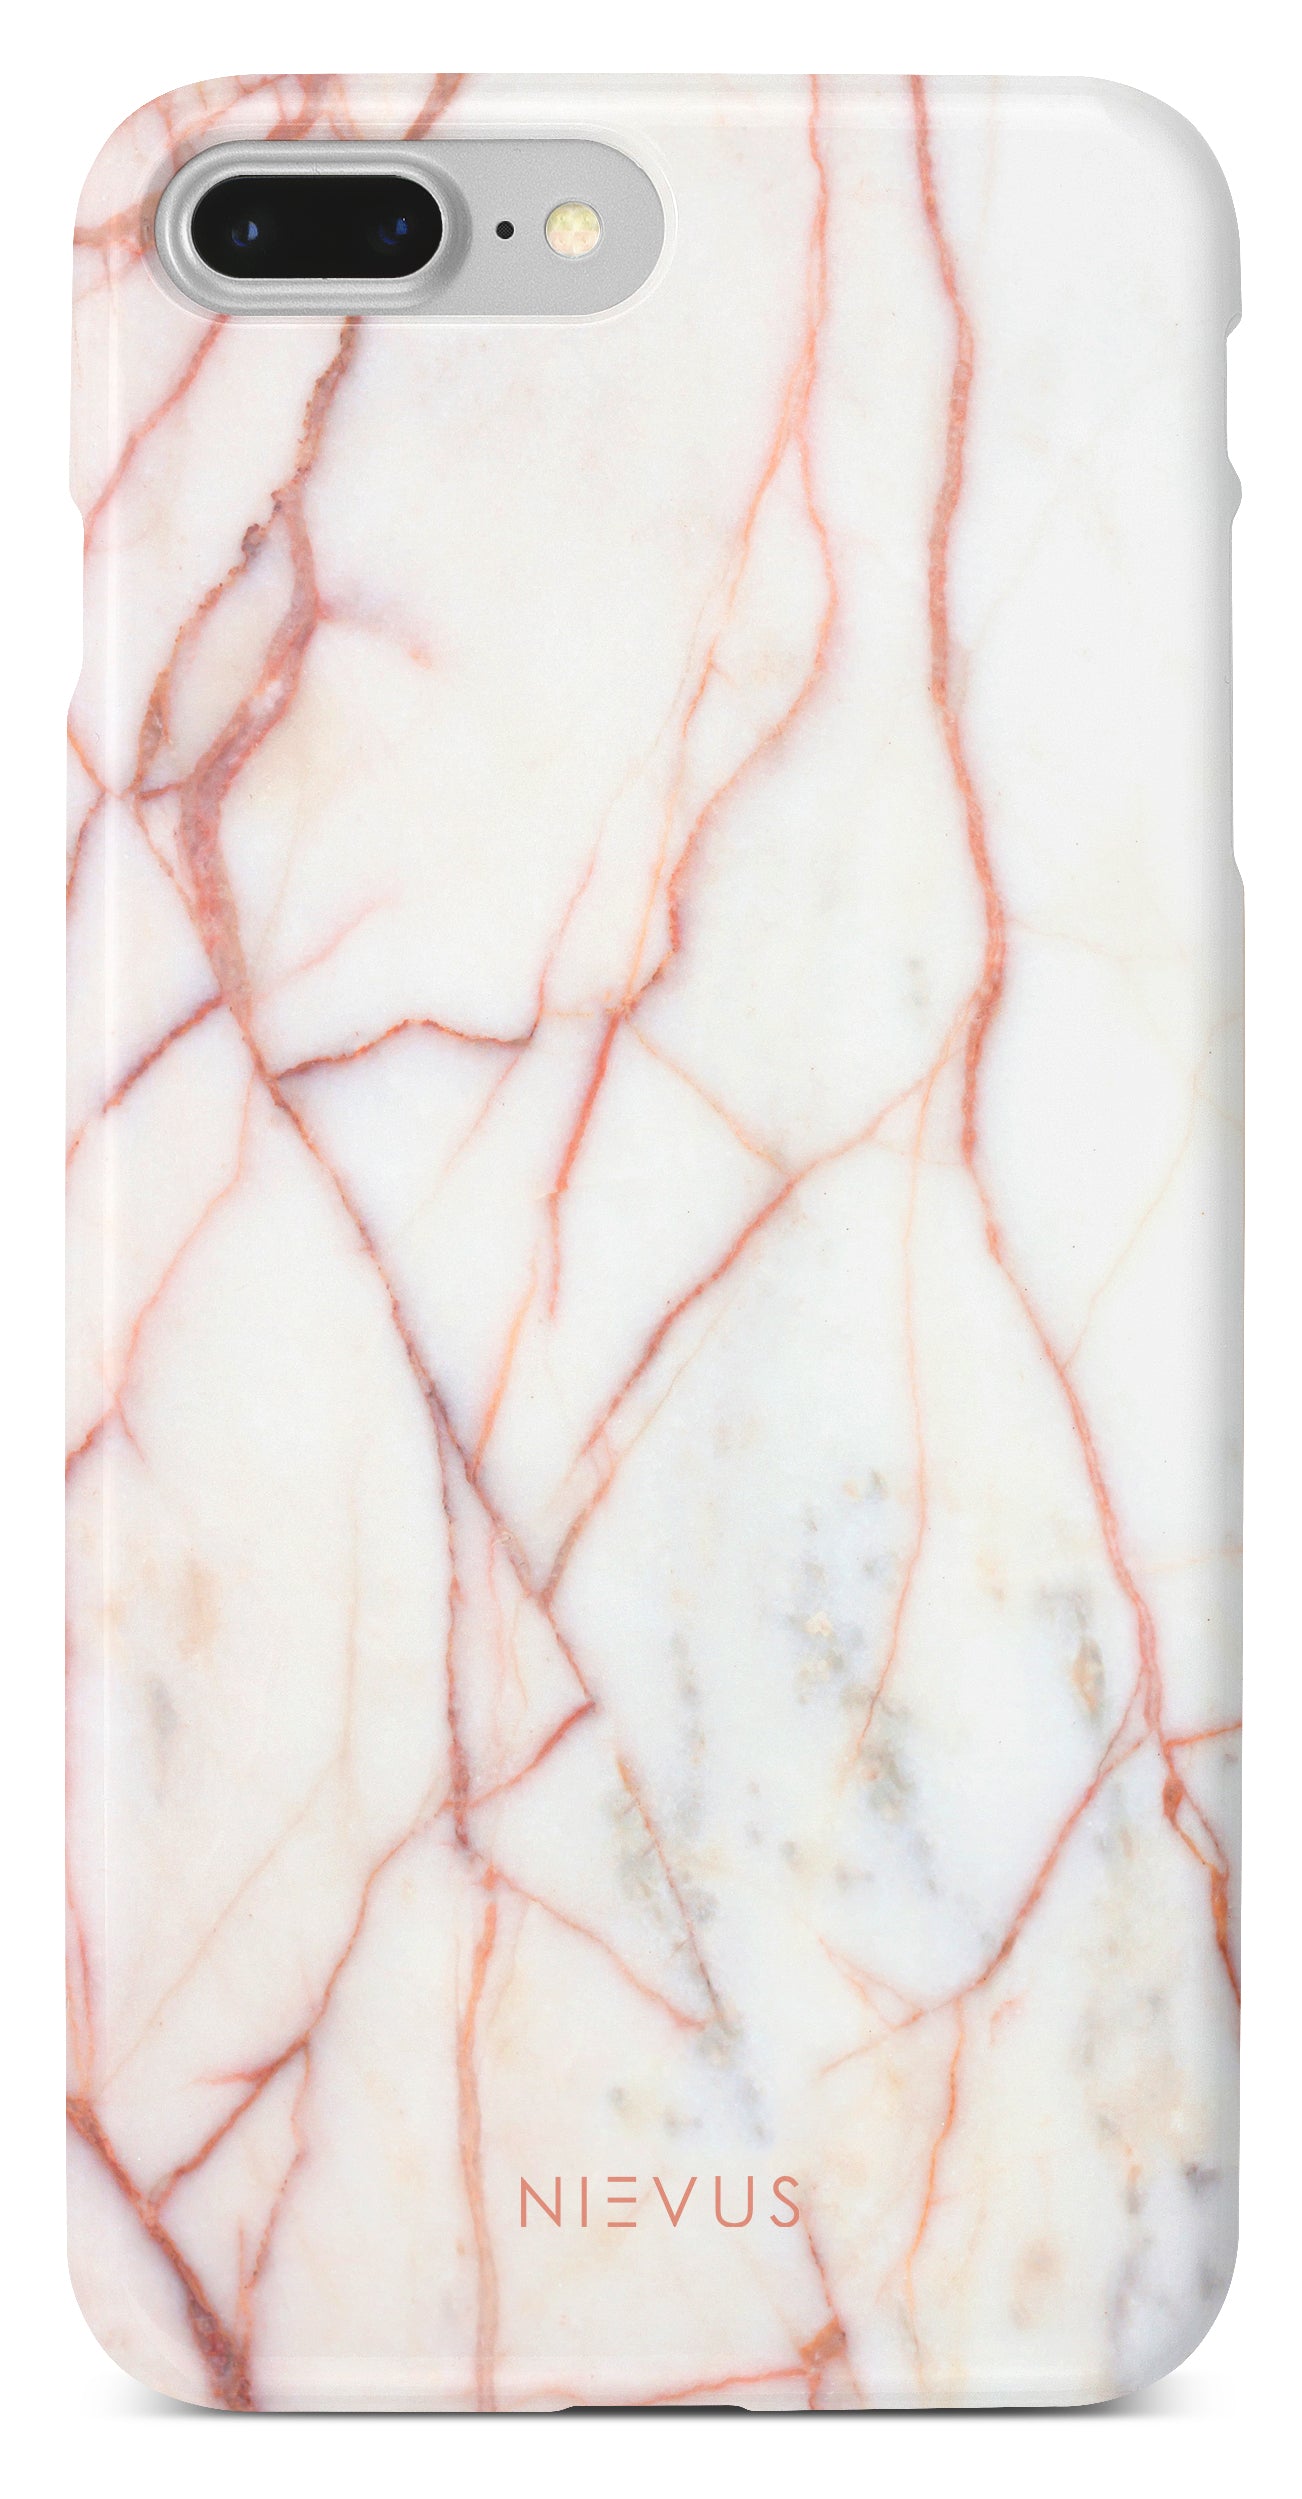 The Pink Marble Case